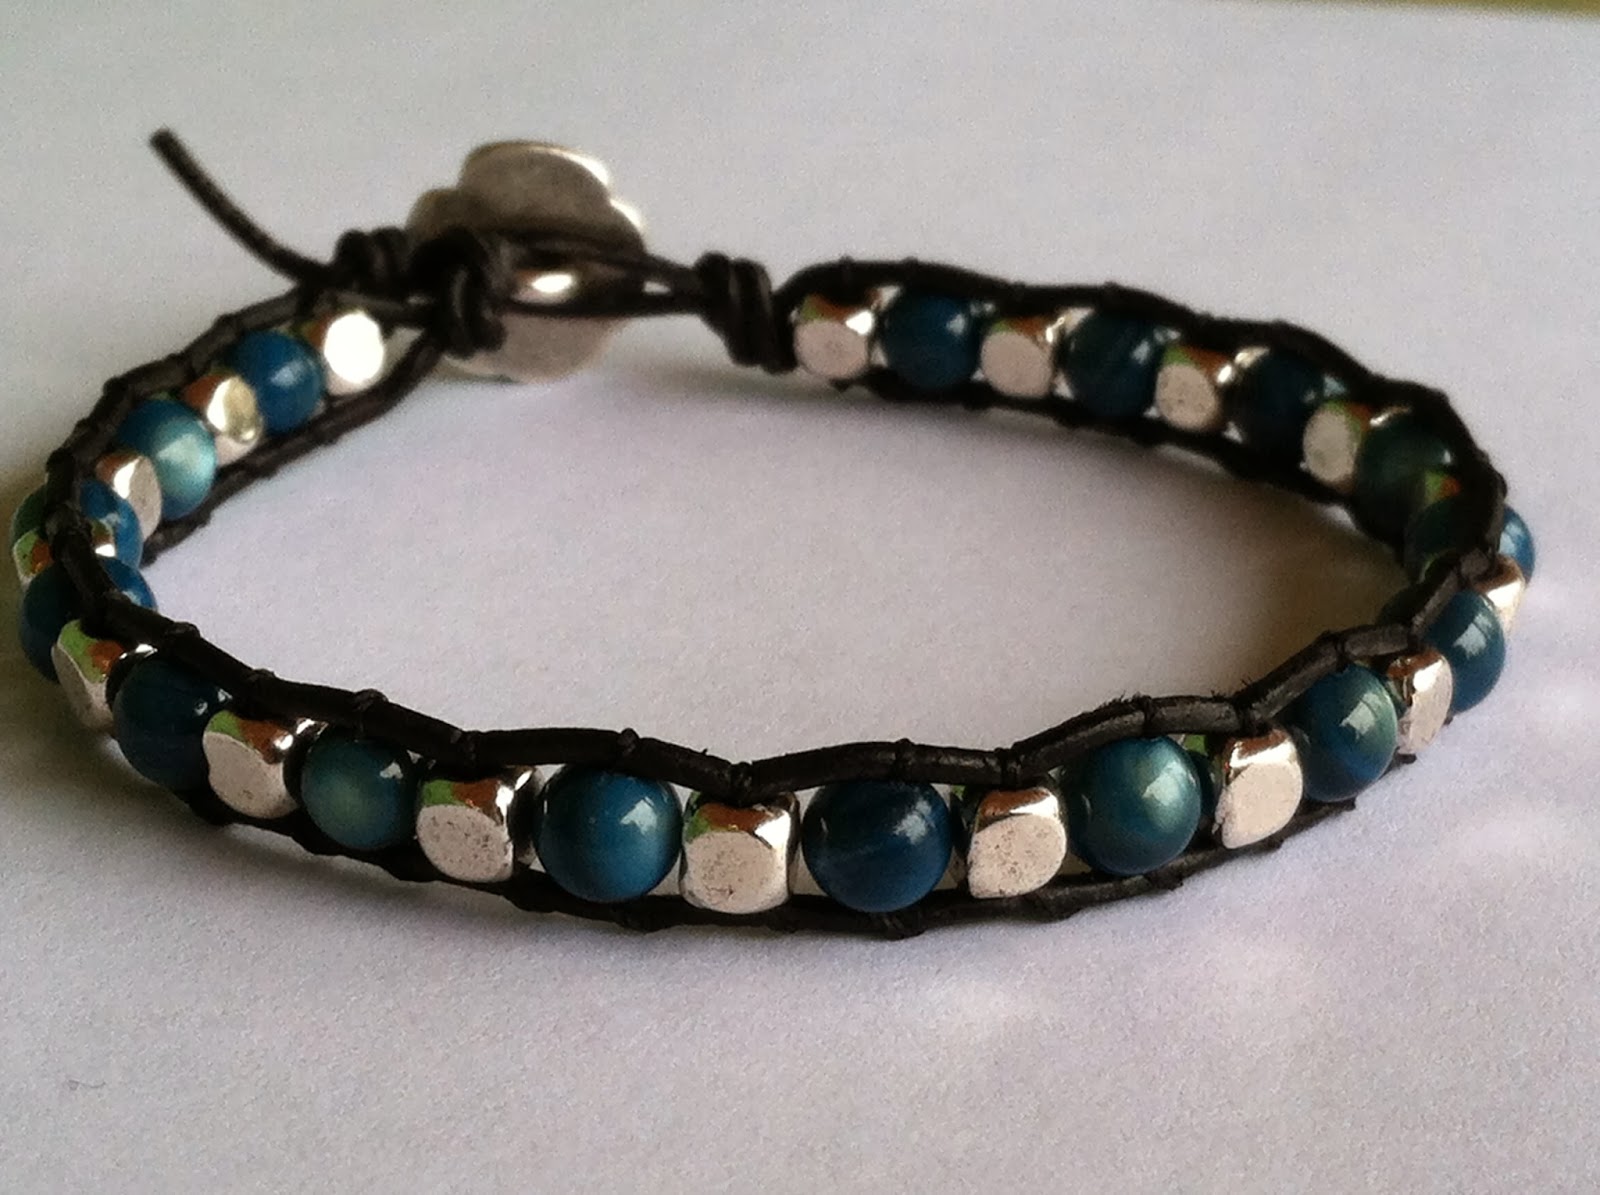 https://www.etsy.com/listing/173053593/leather-beaded-metal-button-clasp?ref=listing-shop-header-1